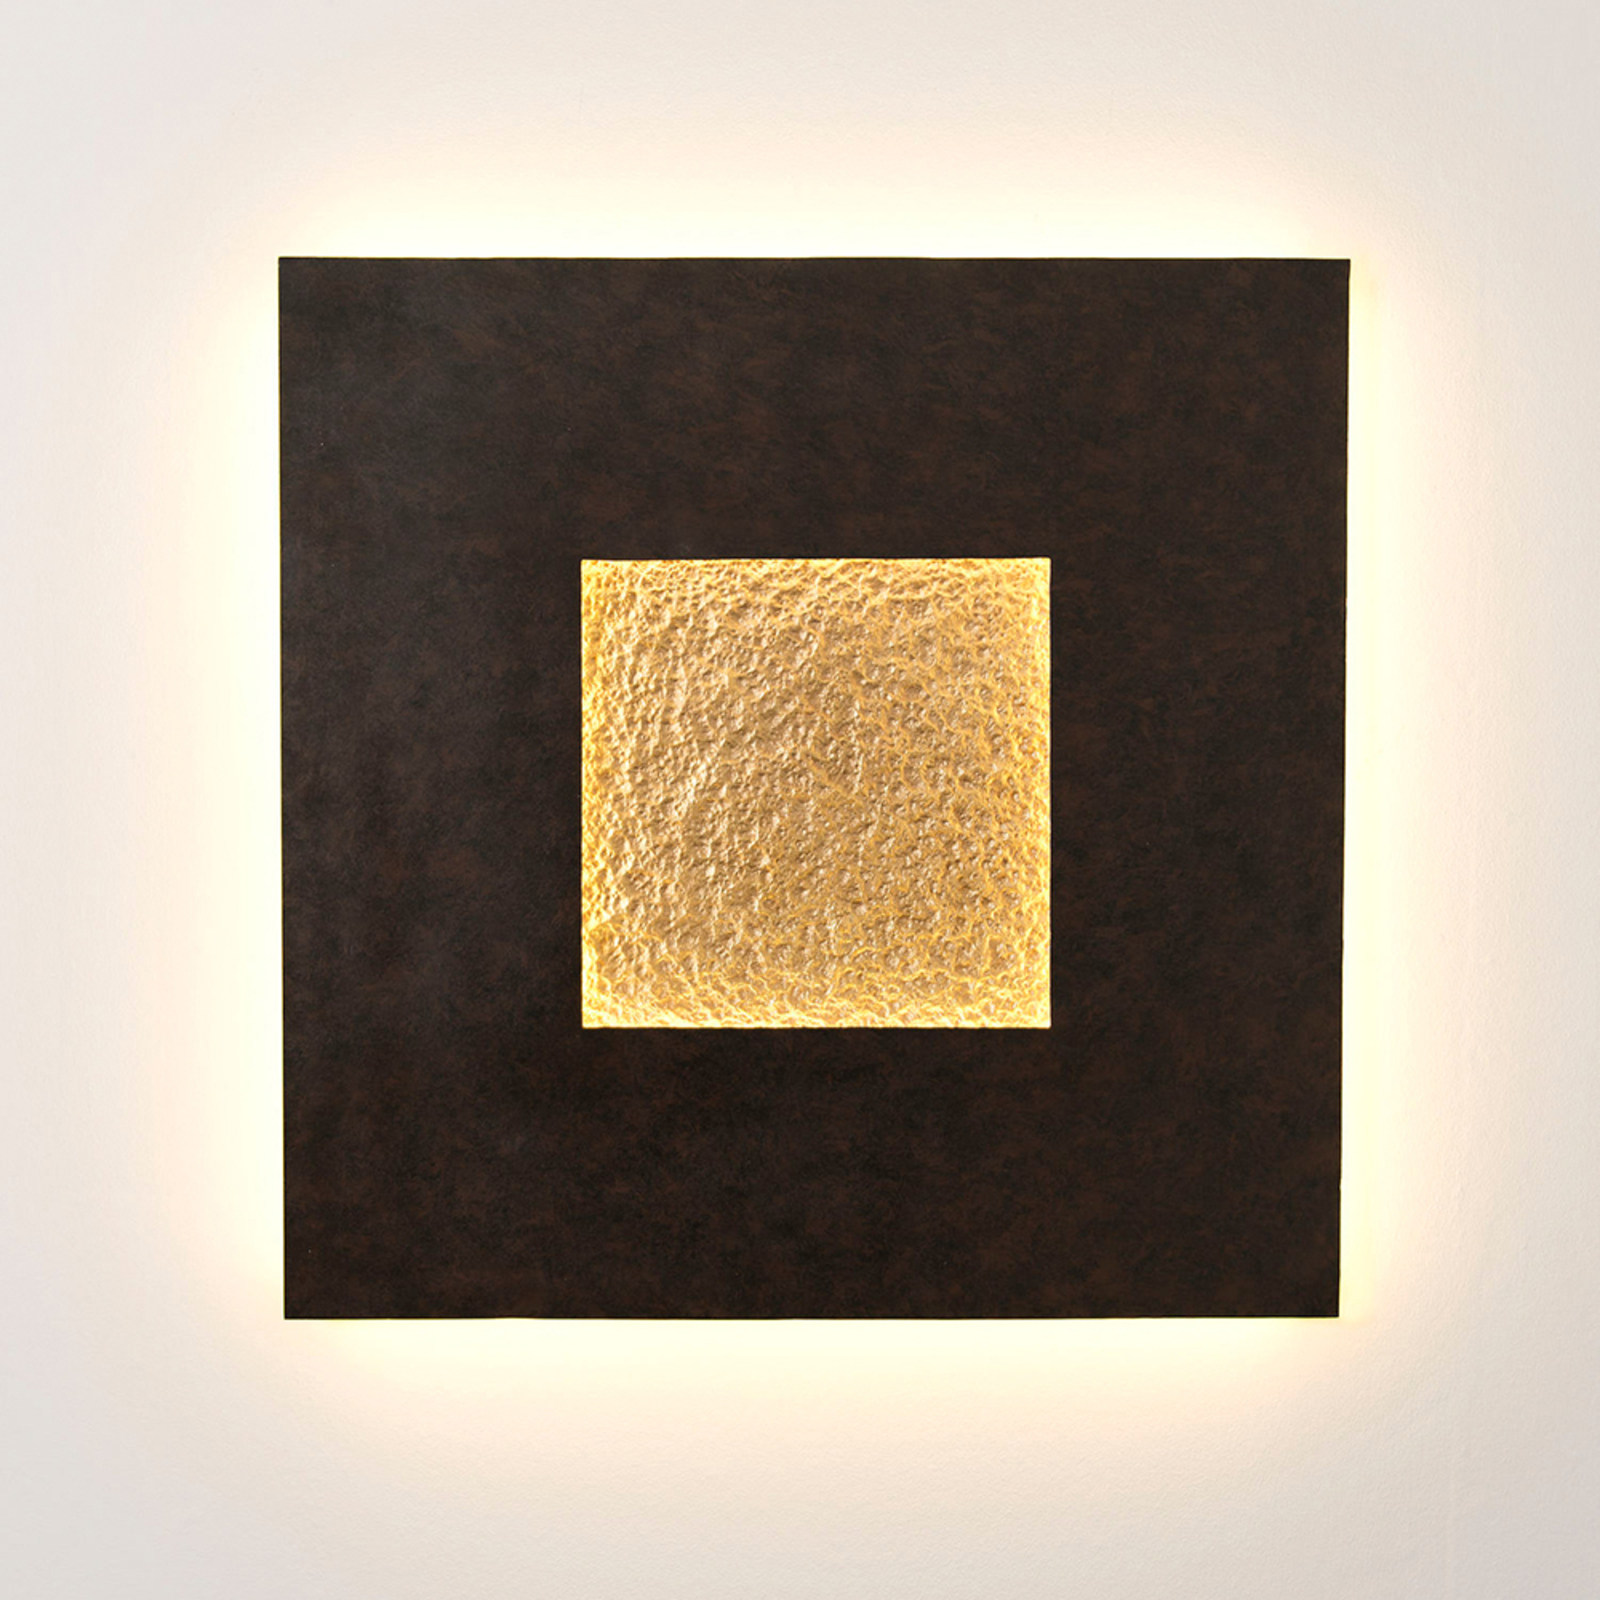 Eclipse LED wall lamp, made of iron